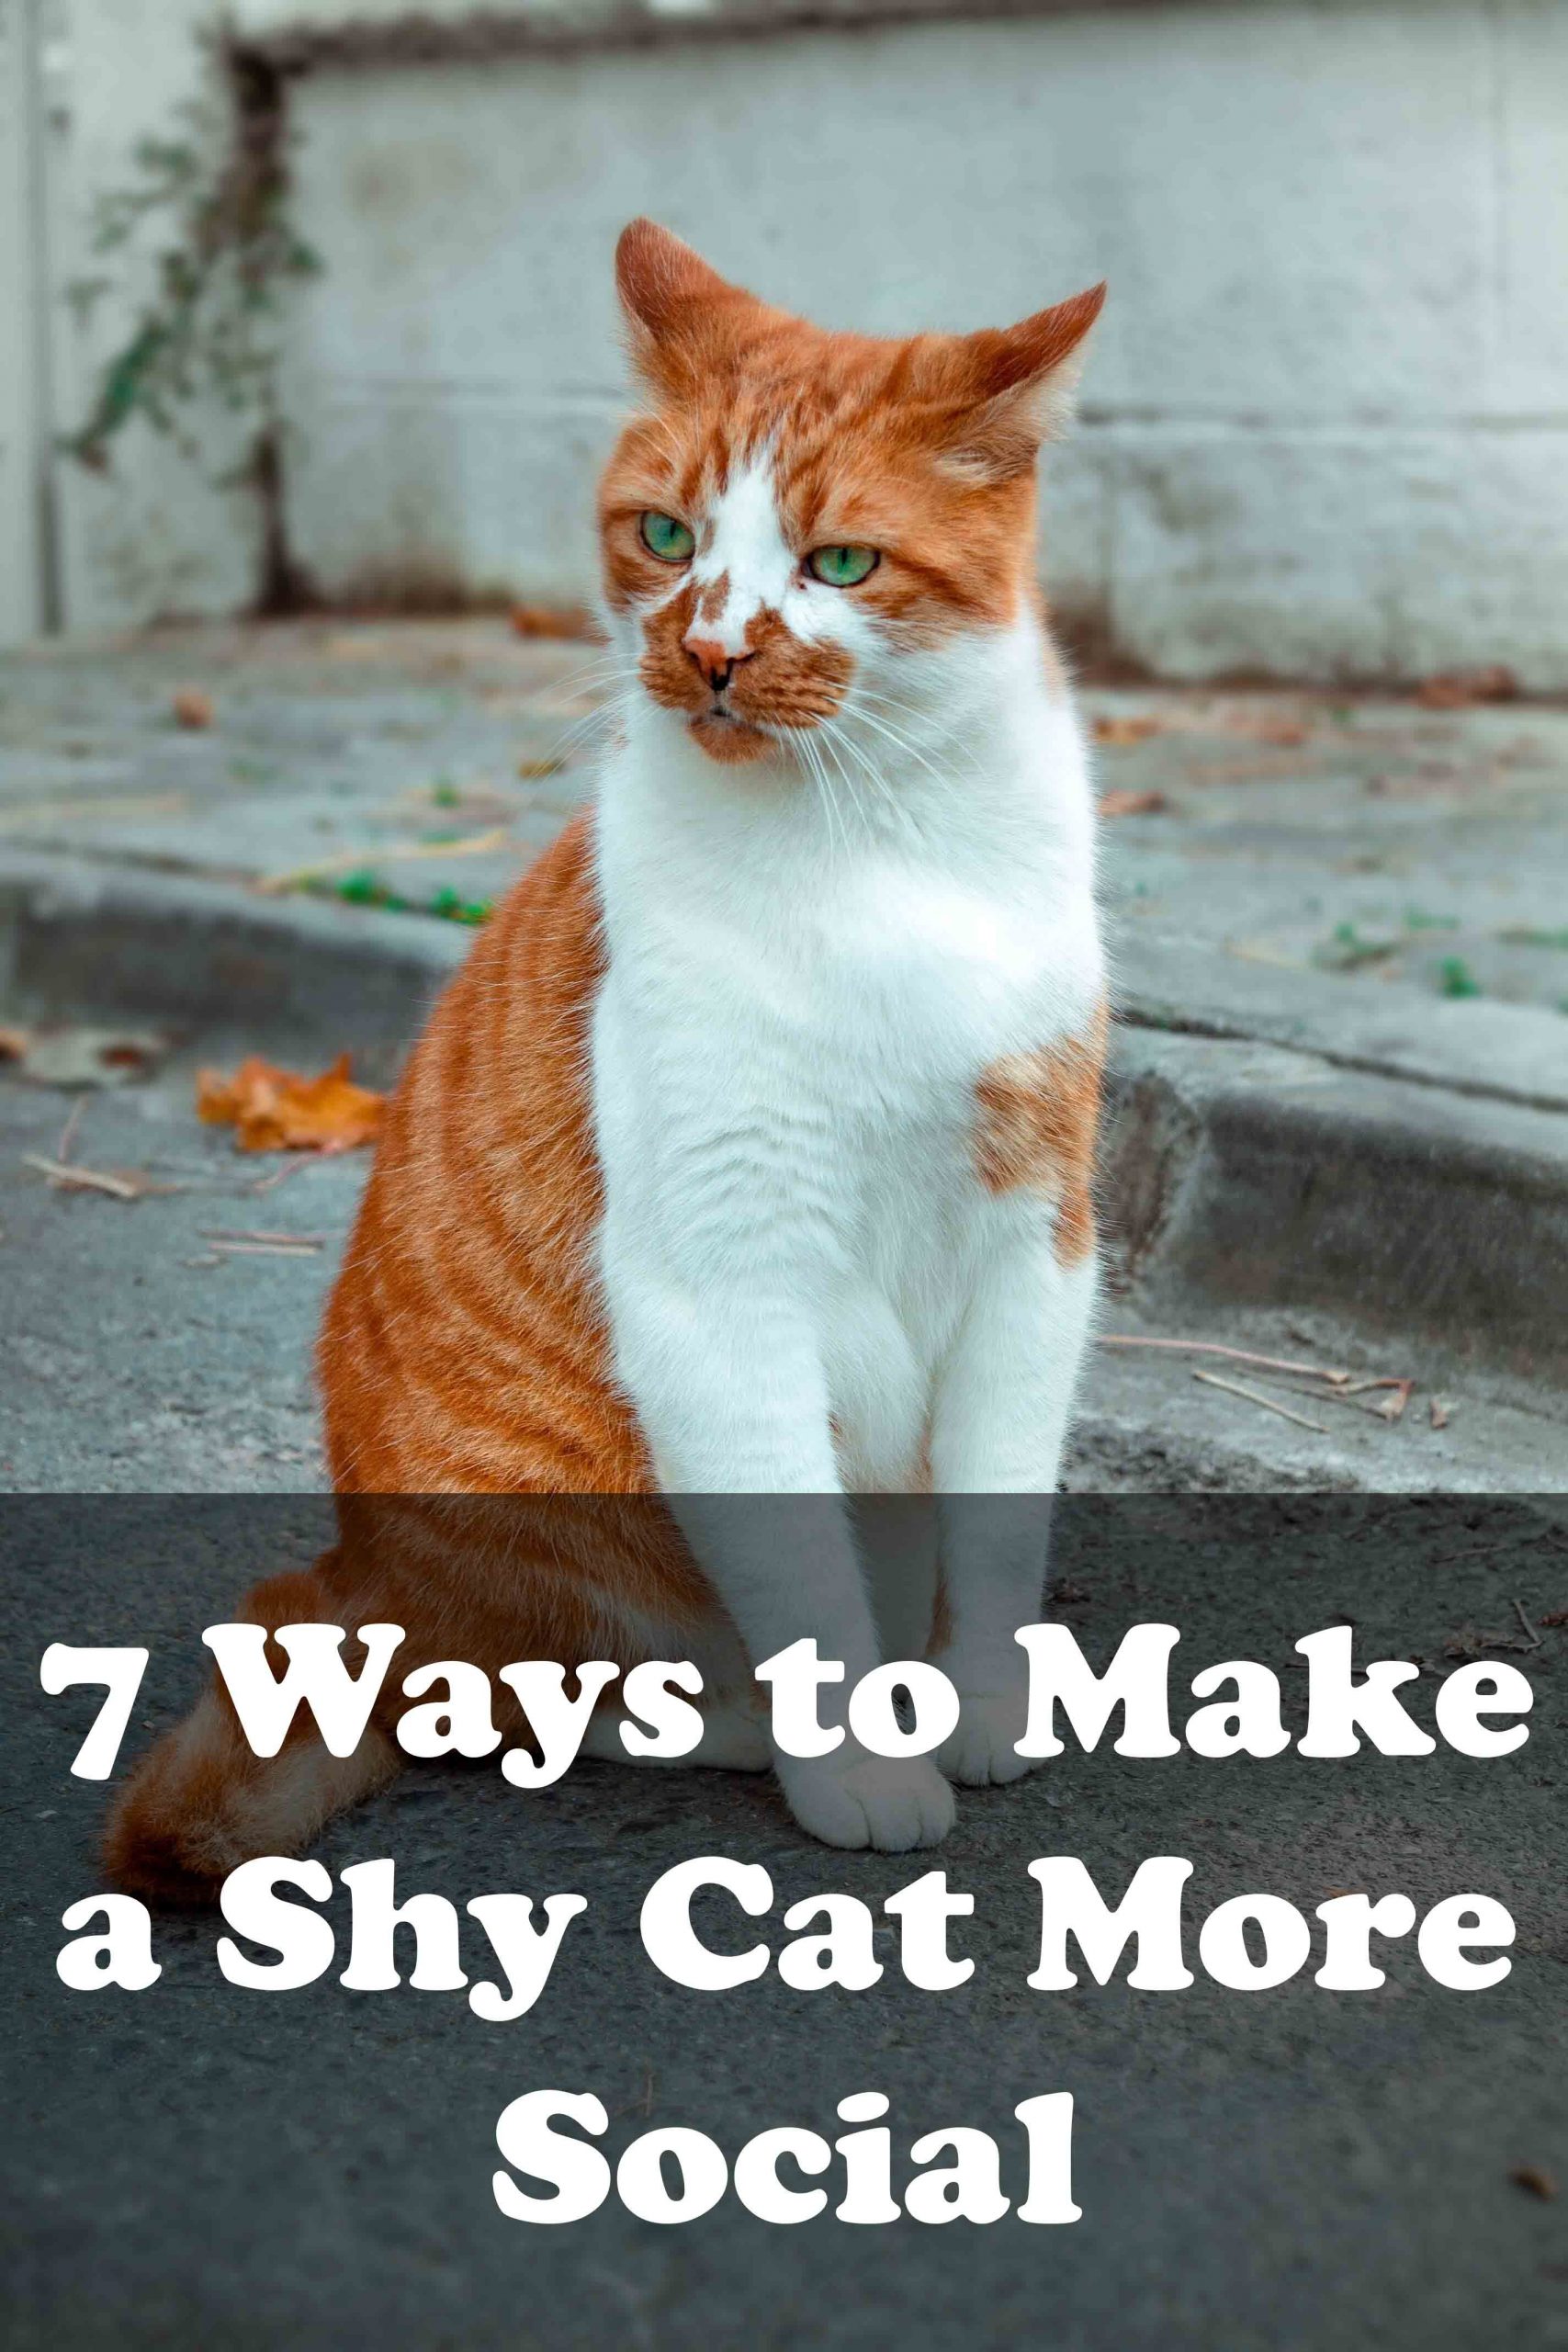 7 Ways to Make a Shy Cat More Social in 2020